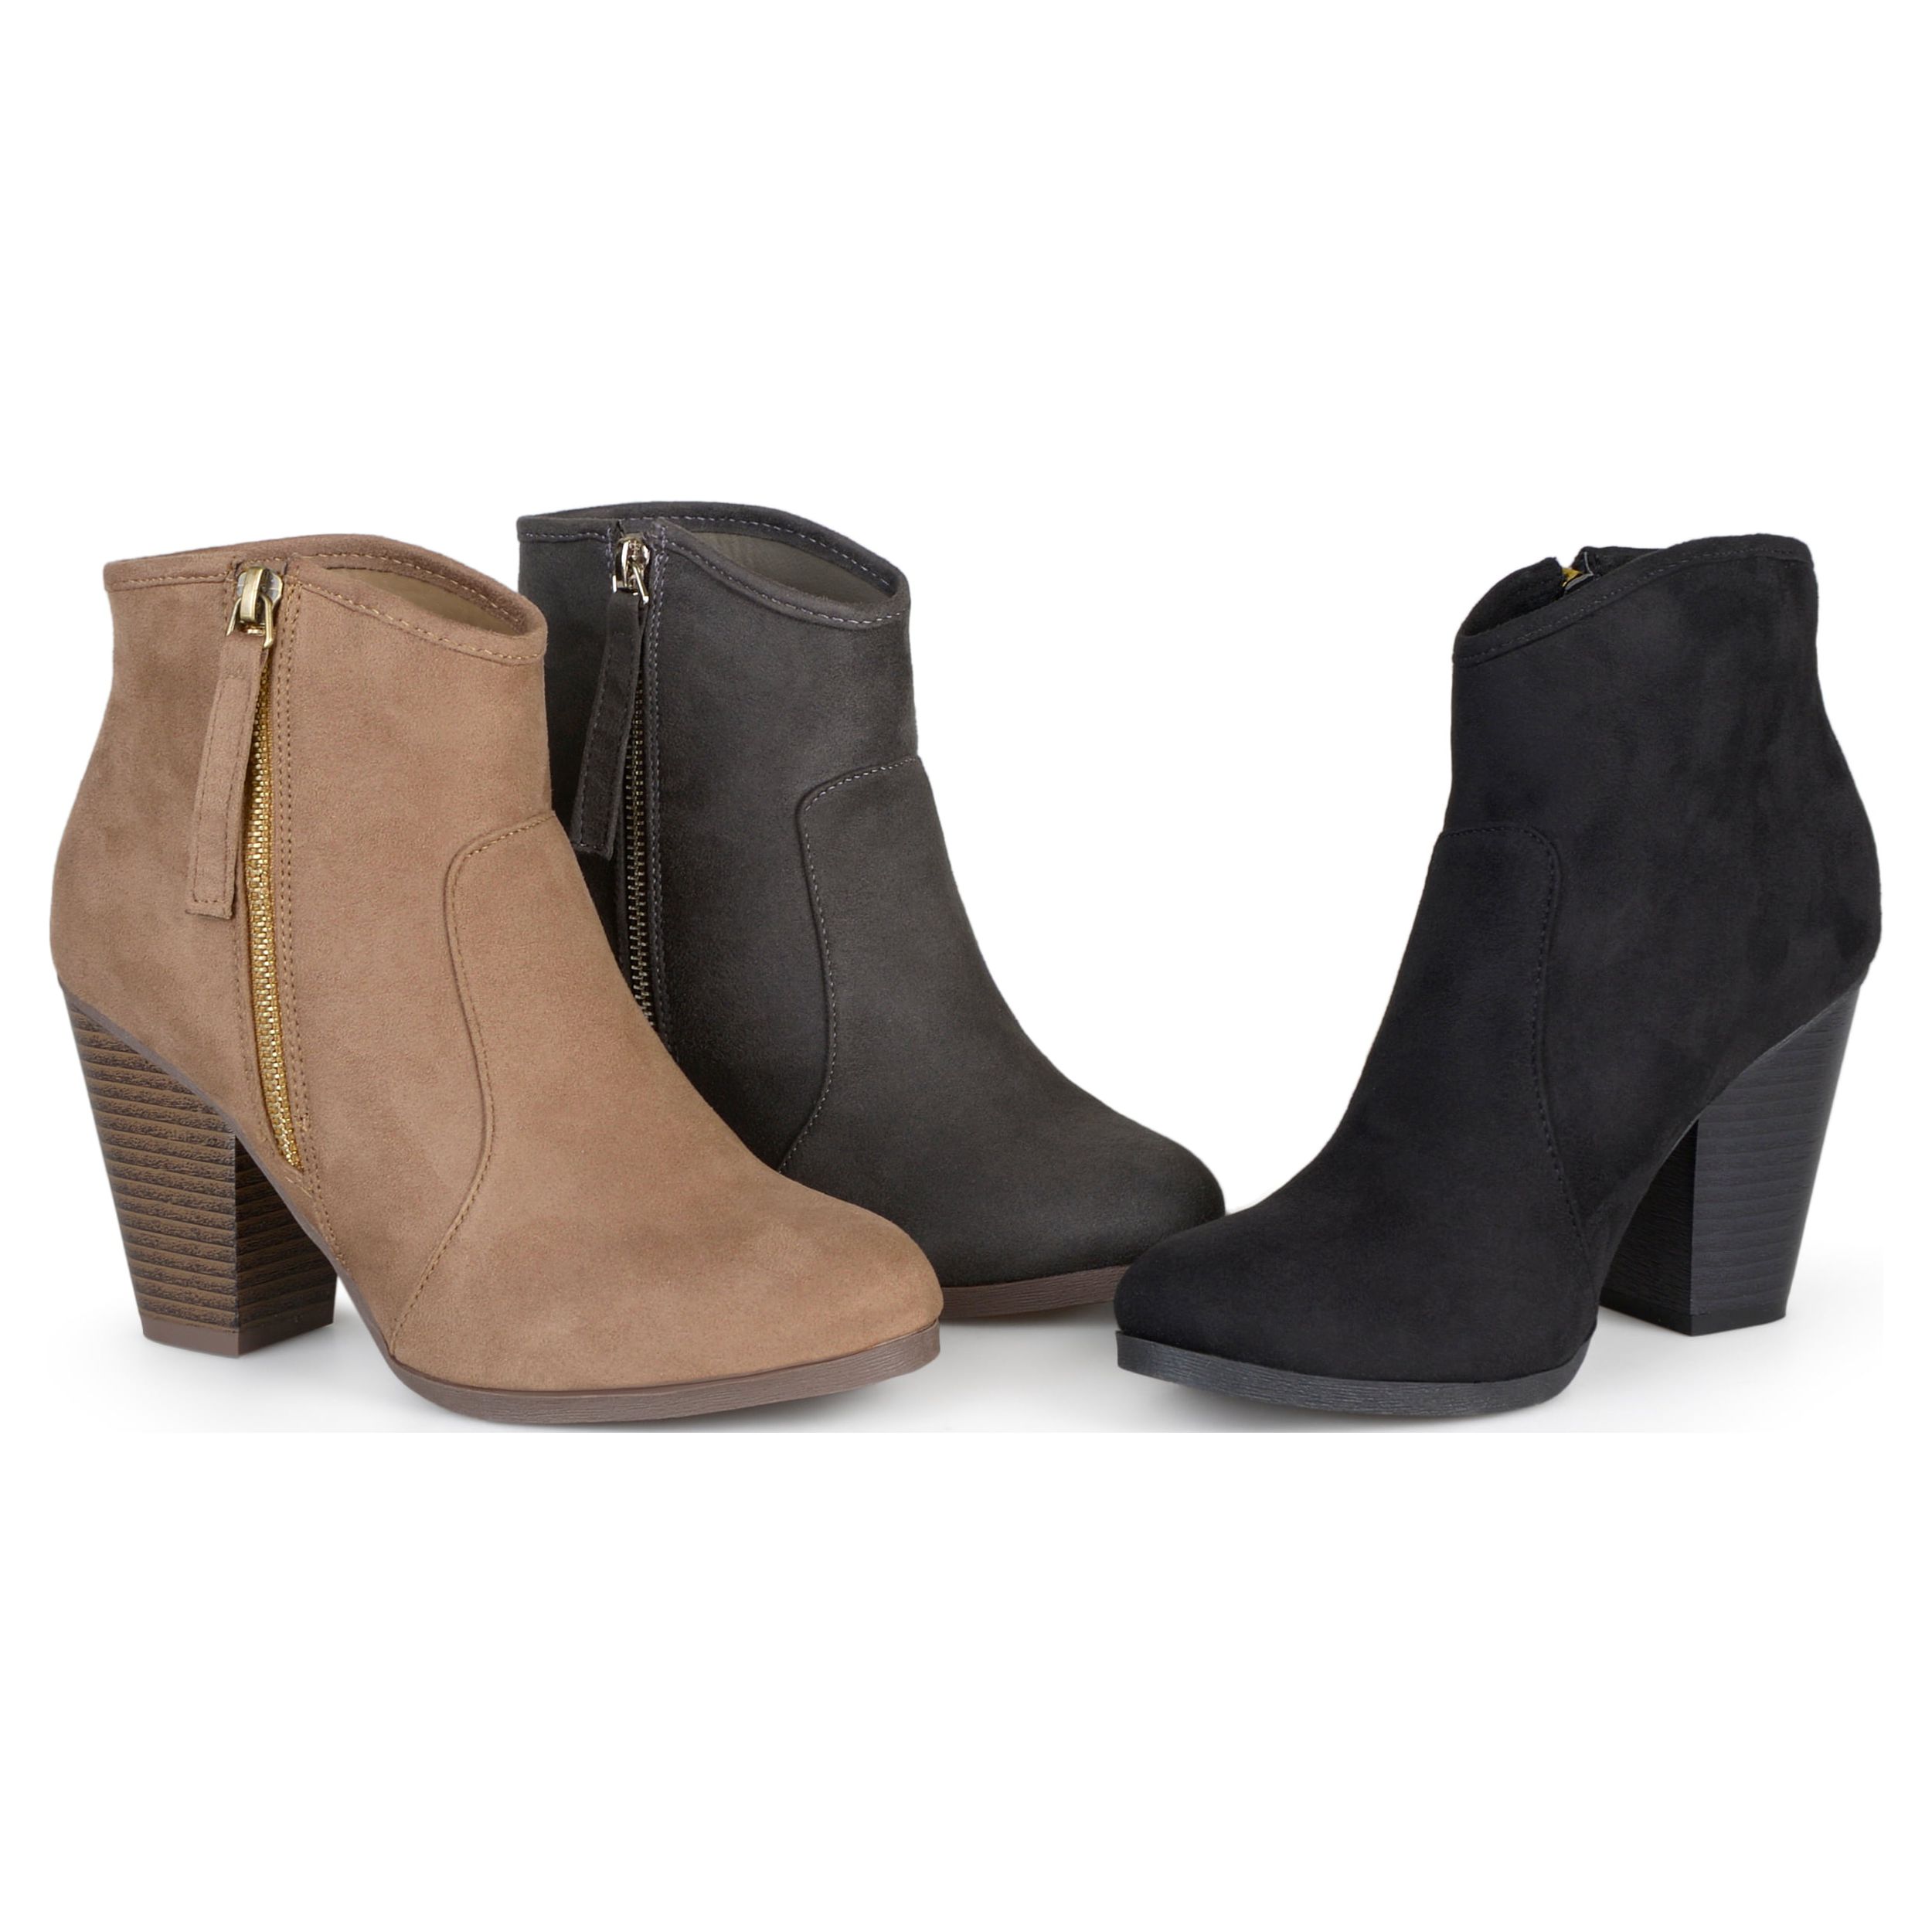 Brinley Co. Women's Wide Width Faux Suede High Heel Ankle Boots - image 3 of 7